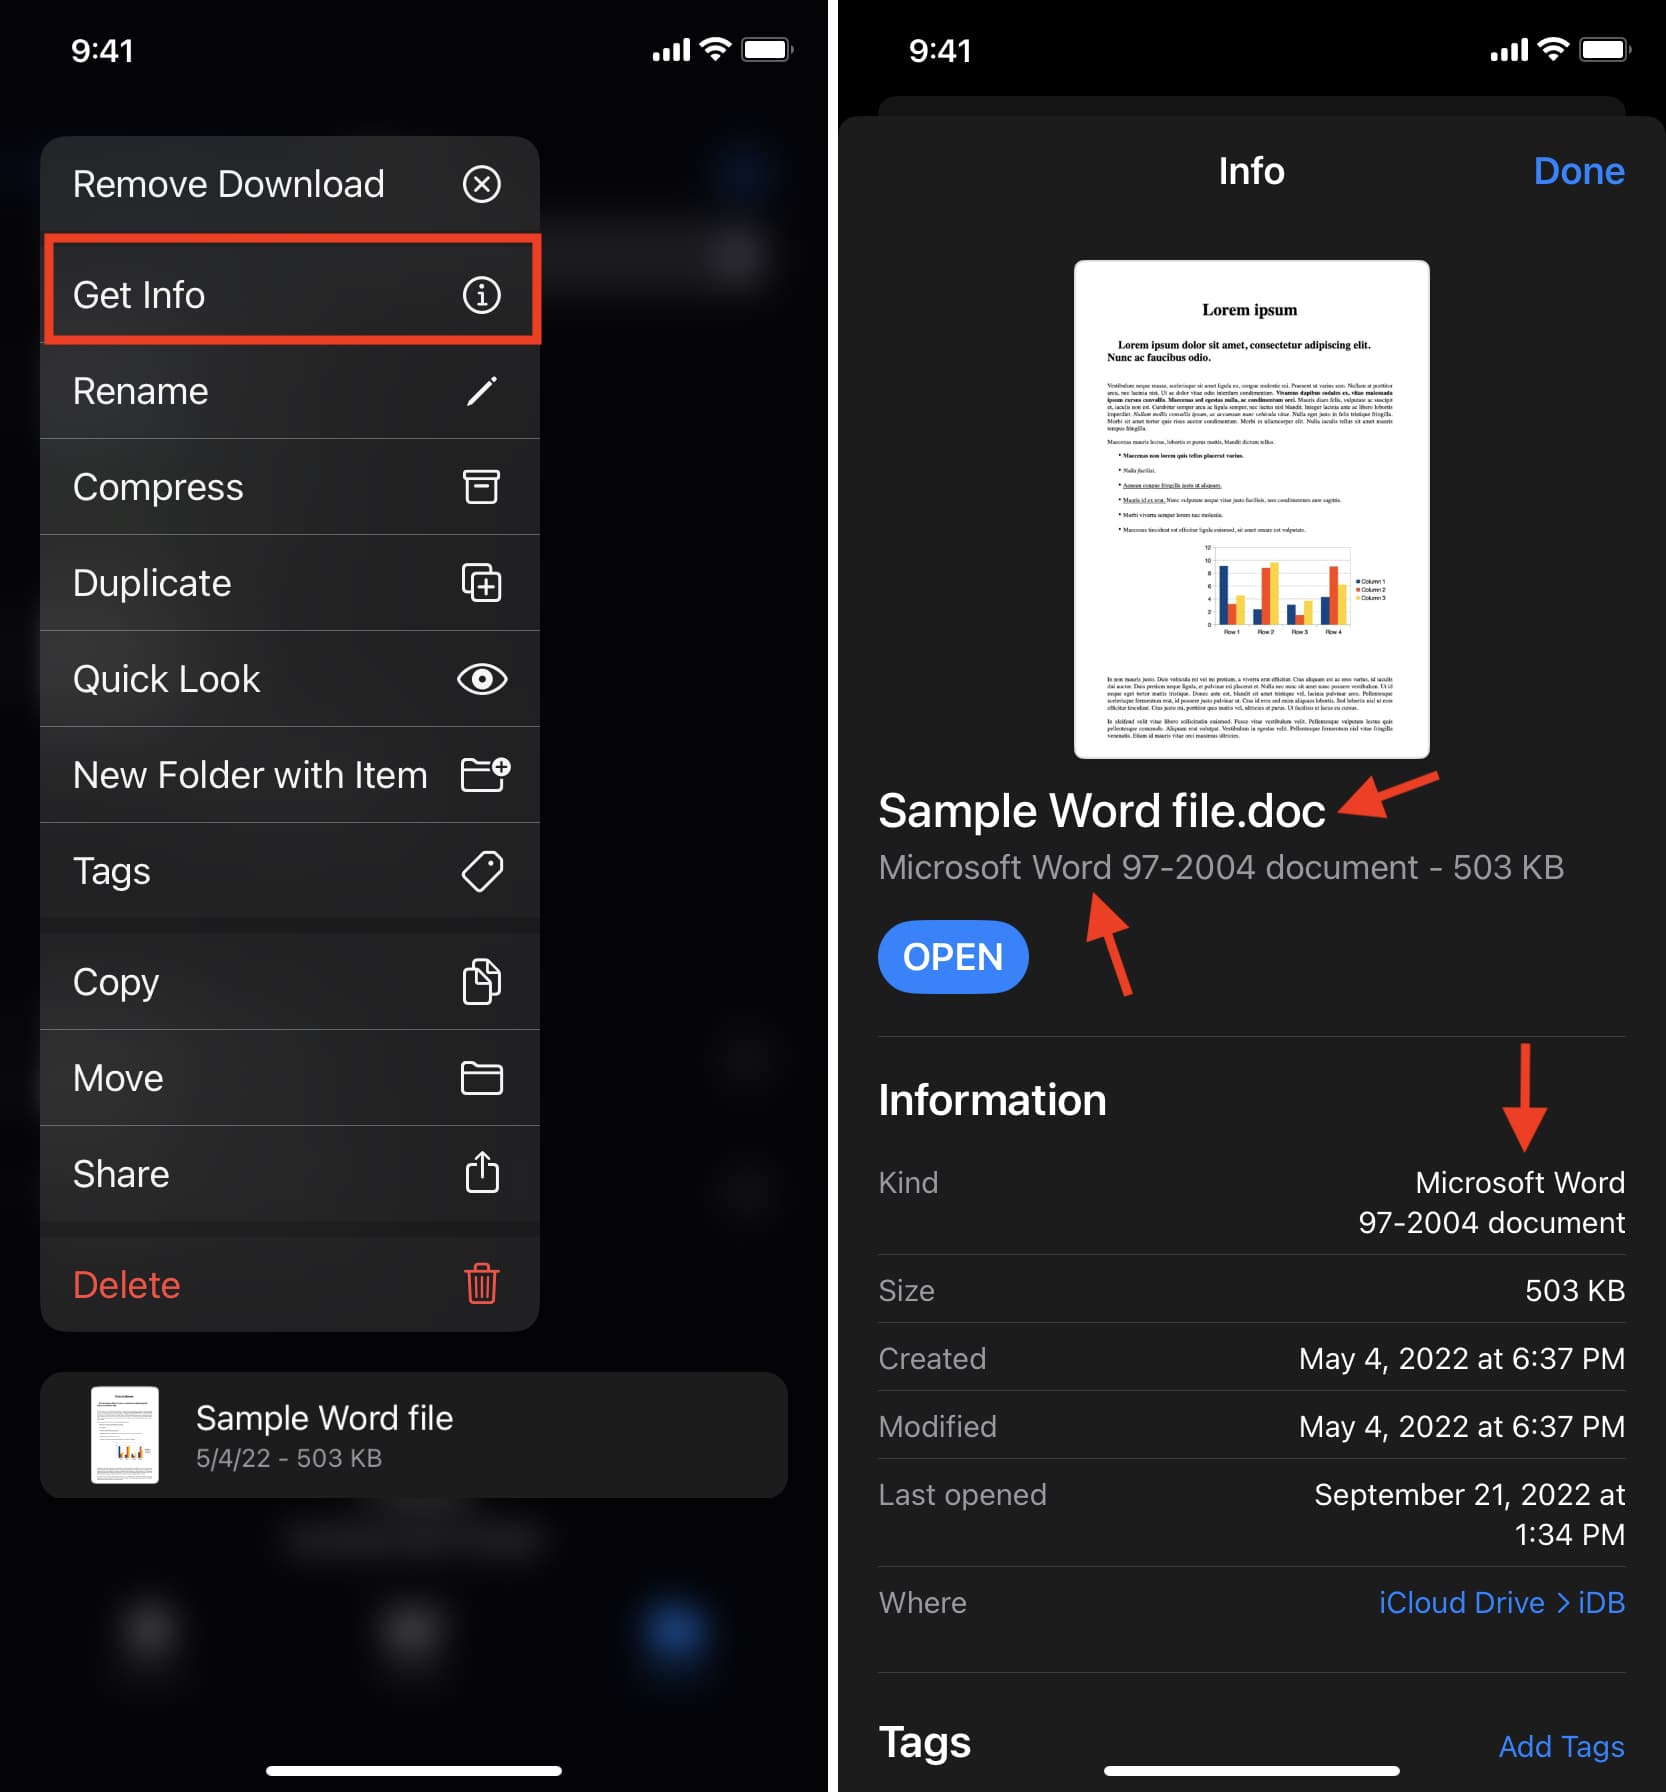 Get Info for a file inside the iPhone Files app